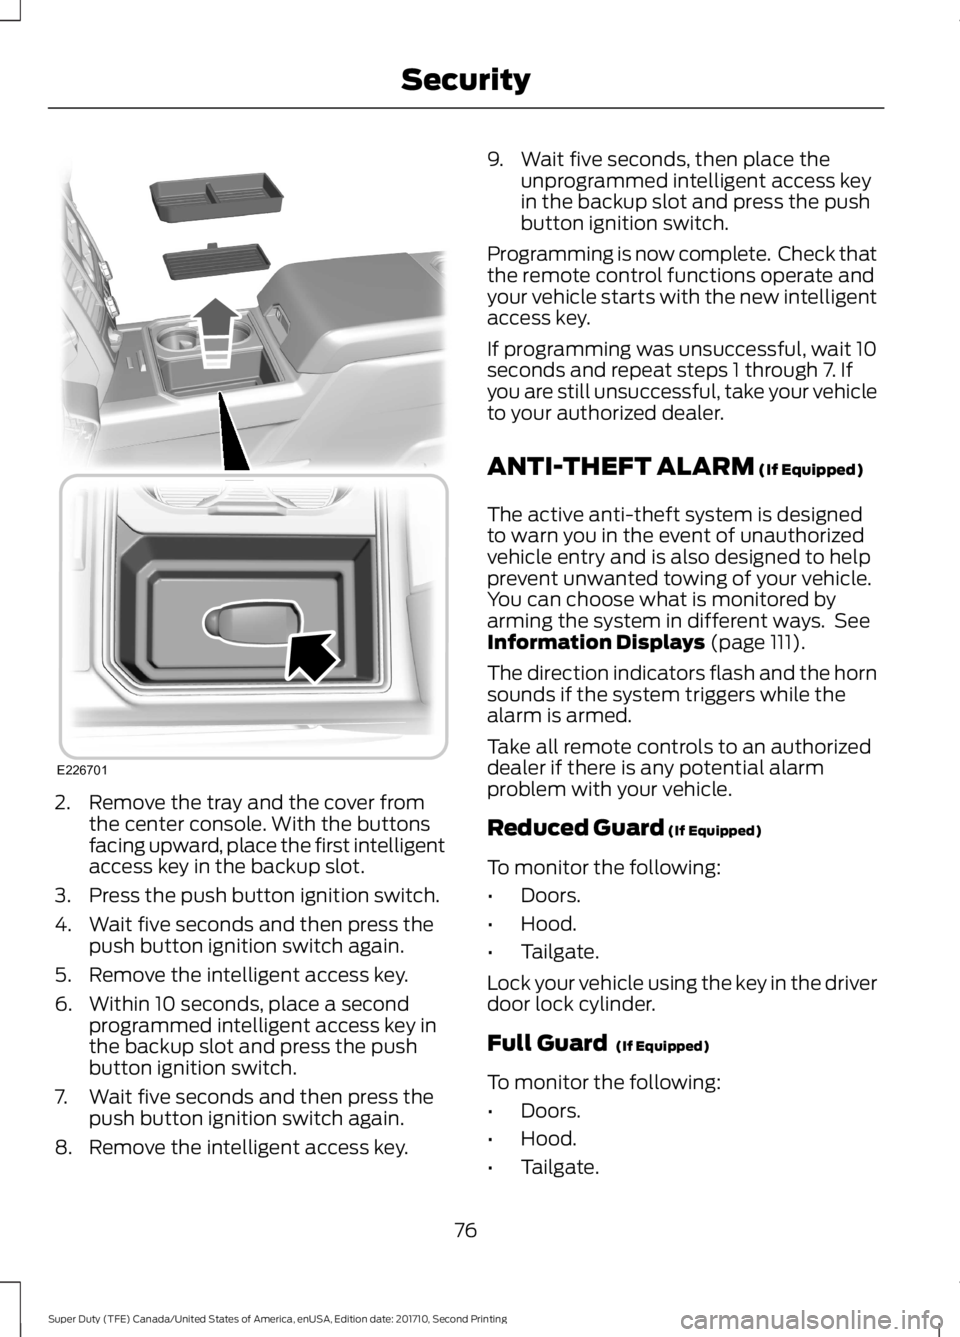 FORD F450 SUPER DUTY 2017  Owners Manual 2. Remove the tray and the cover fromthe center console. With the buttonsfacing upward, place the first intelligentaccess key in the backup slot.
3. Press the push button ignition switch.
4. Wait five